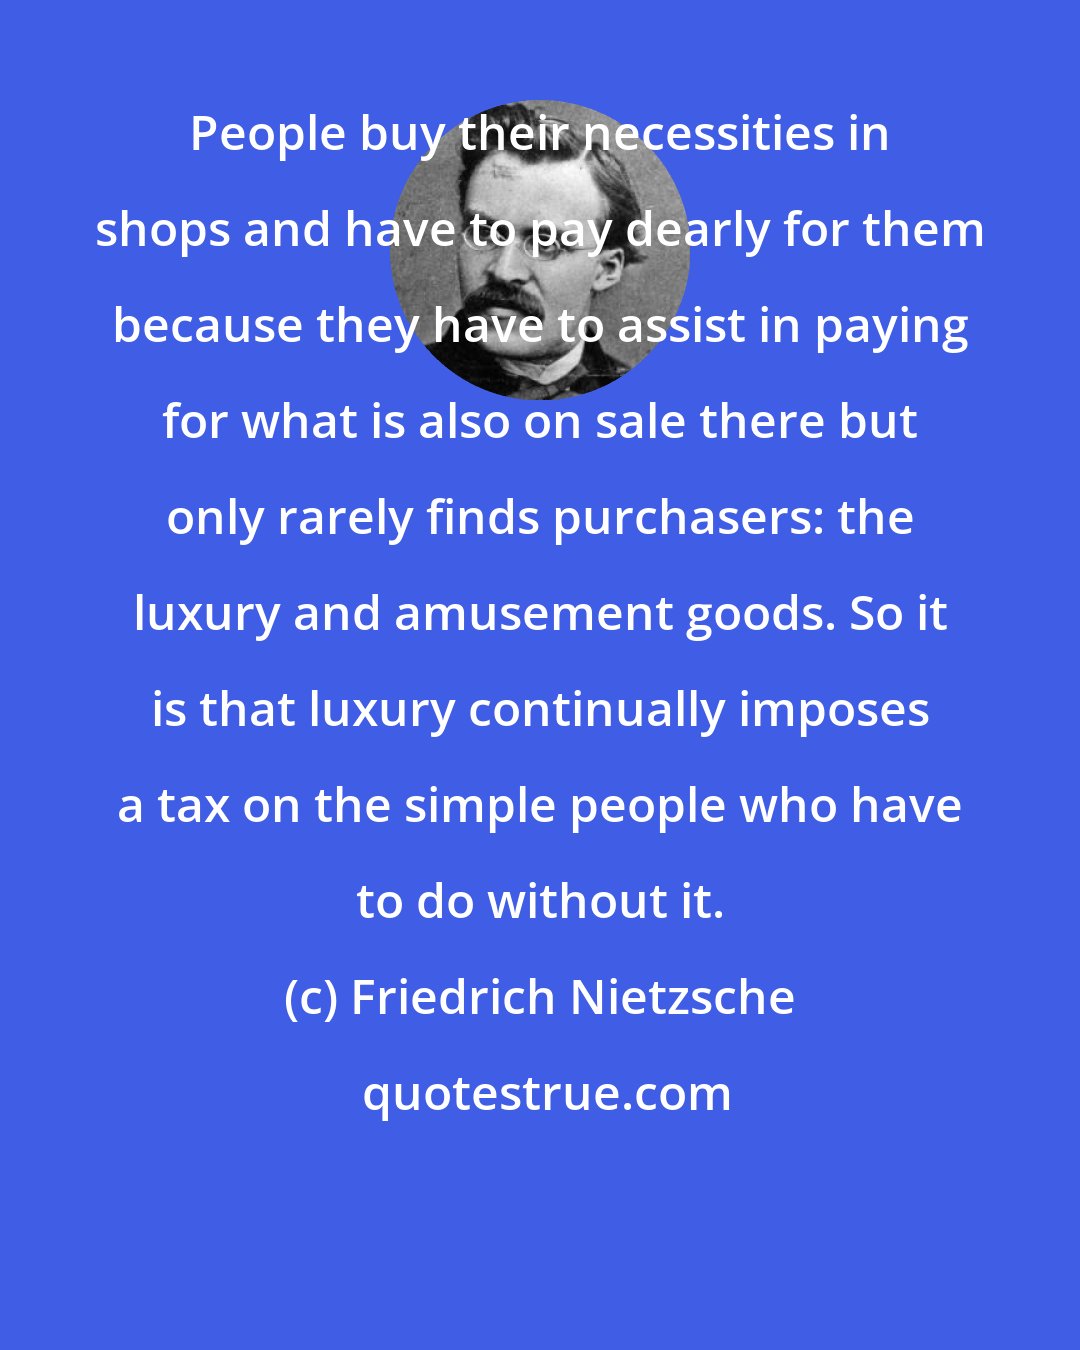 Friedrich Nietzsche: People buy their necessities in shops and have to pay dearly for them because they have to assist in paying for what is also on sale there but only rarely finds purchasers: the luxury and amusement goods. So it is that luxury continually imposes a tax on the simple people who have to do without it.